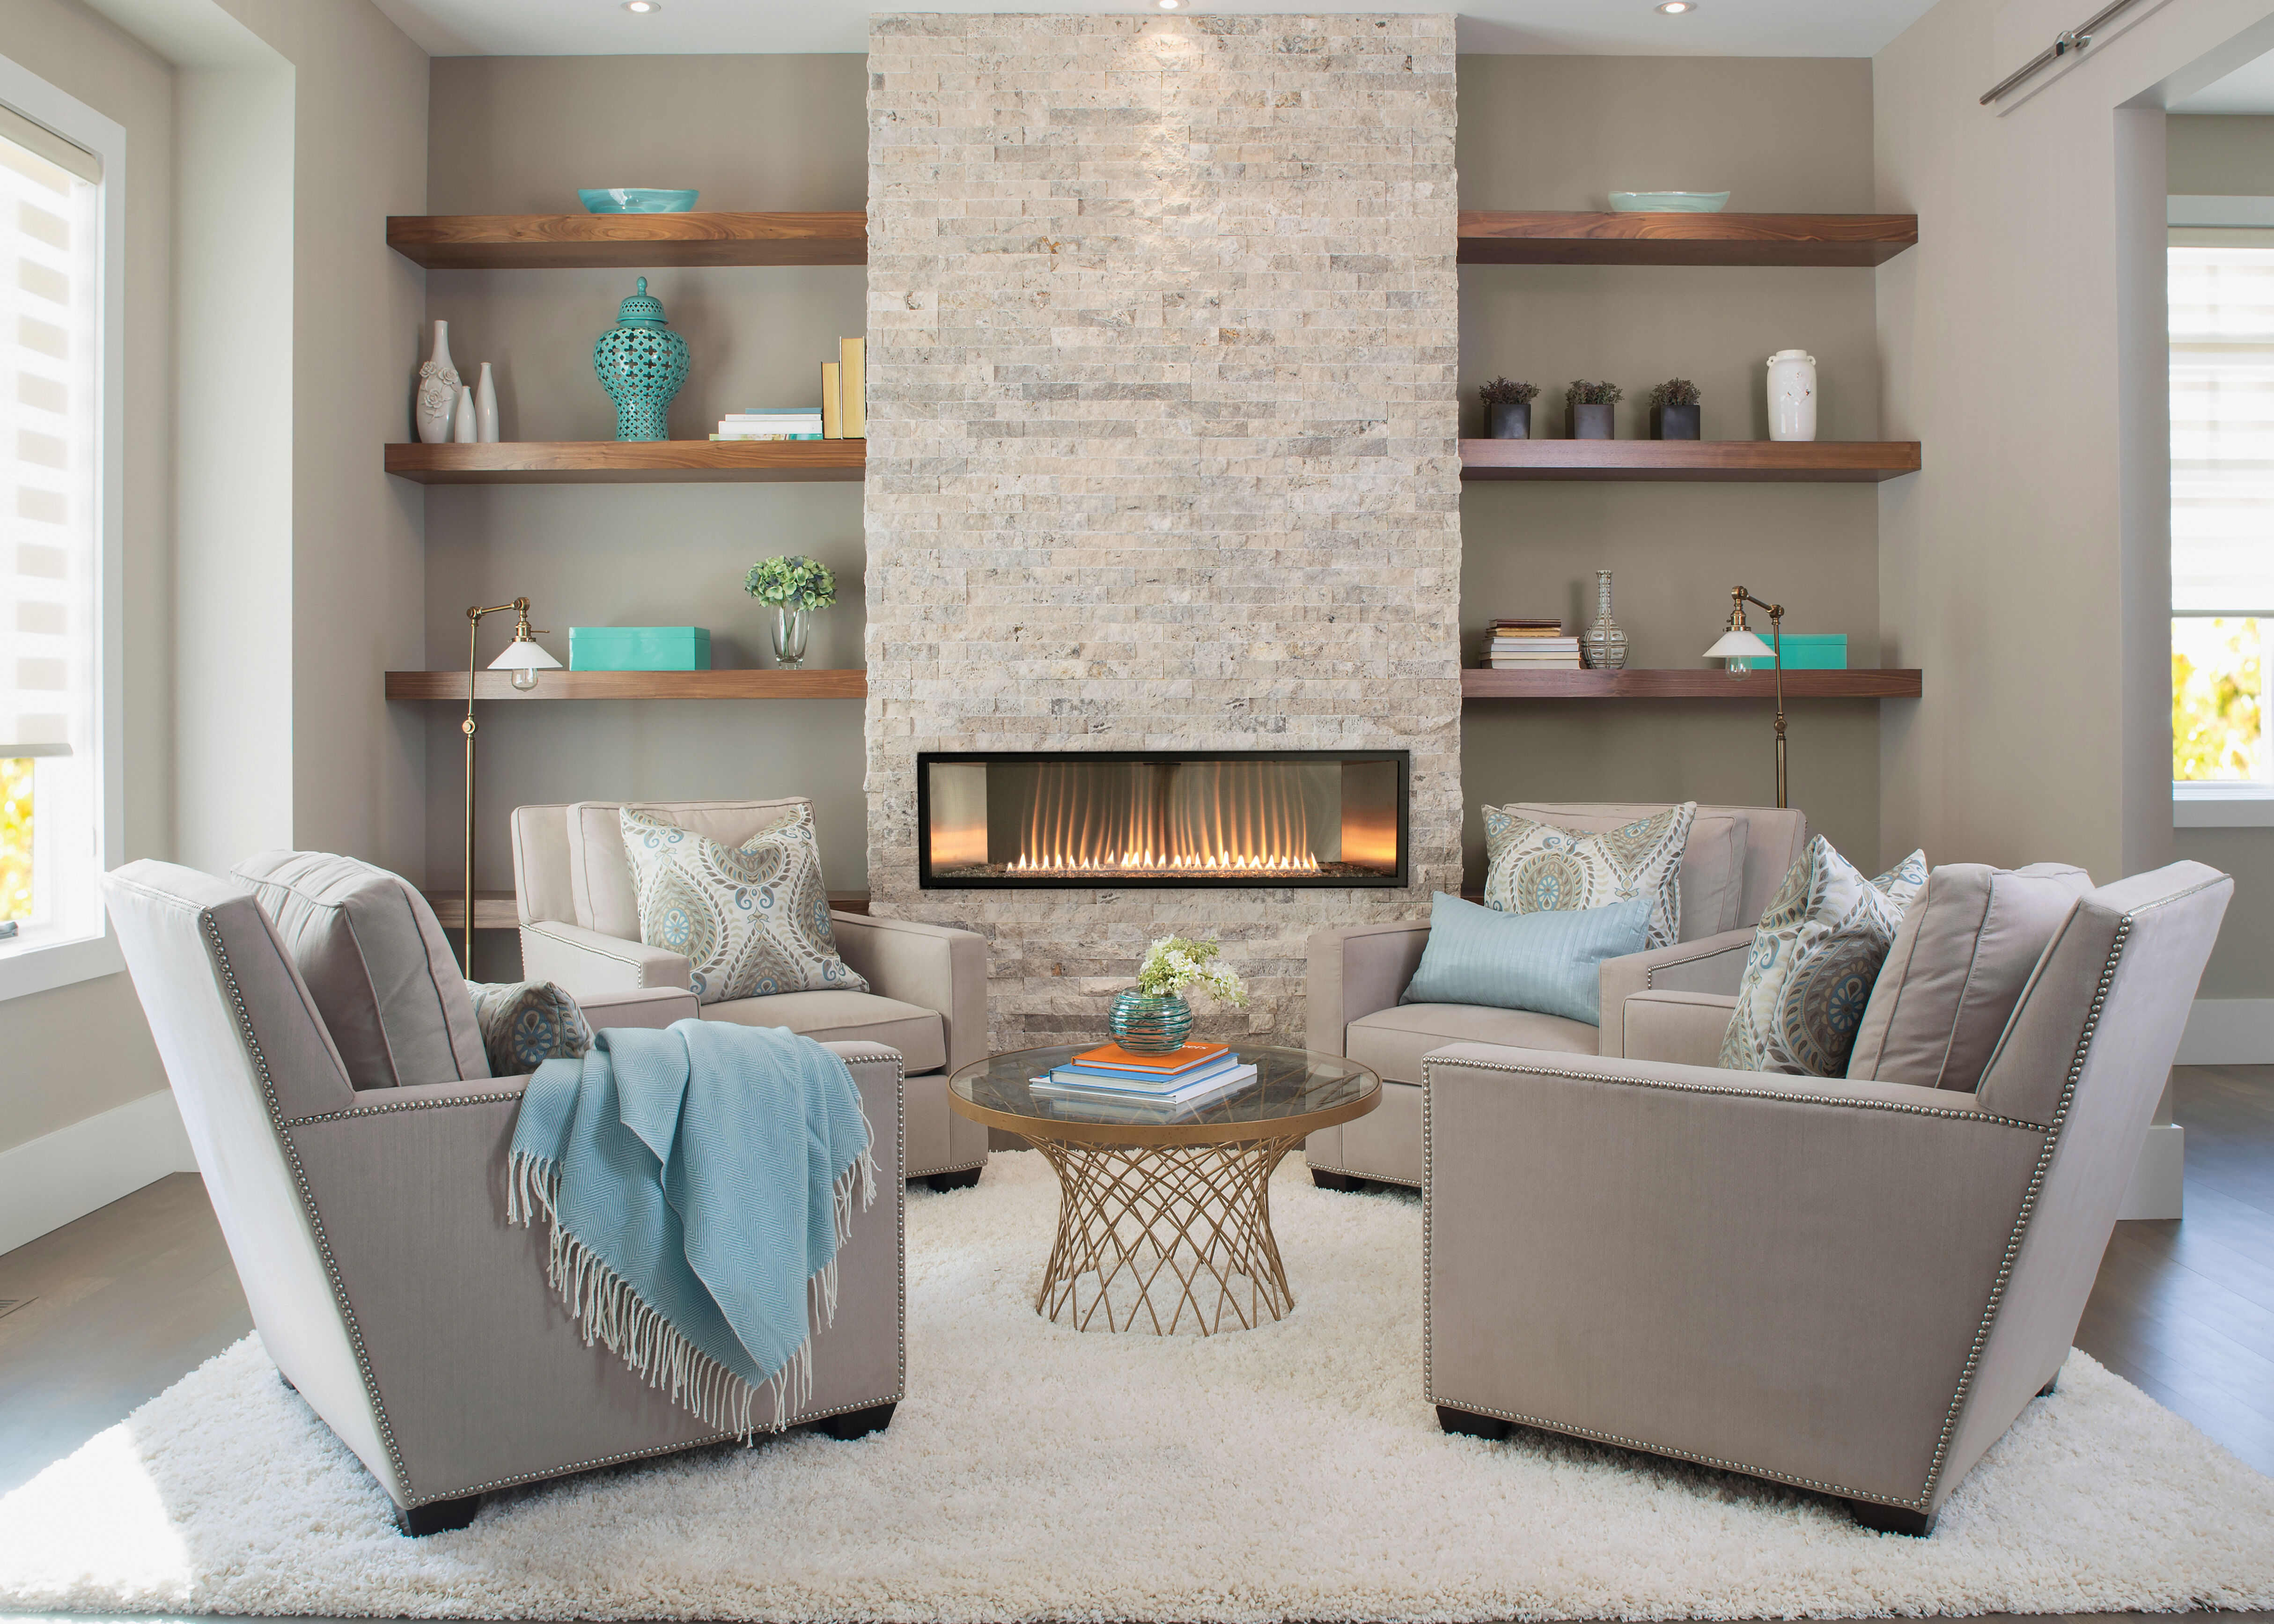 A contemporary living room with a large, natural stone hearth and linear gas fireplace, built-in shelving with blue accent pieces, and gray furniture with blue blankets and pillows.